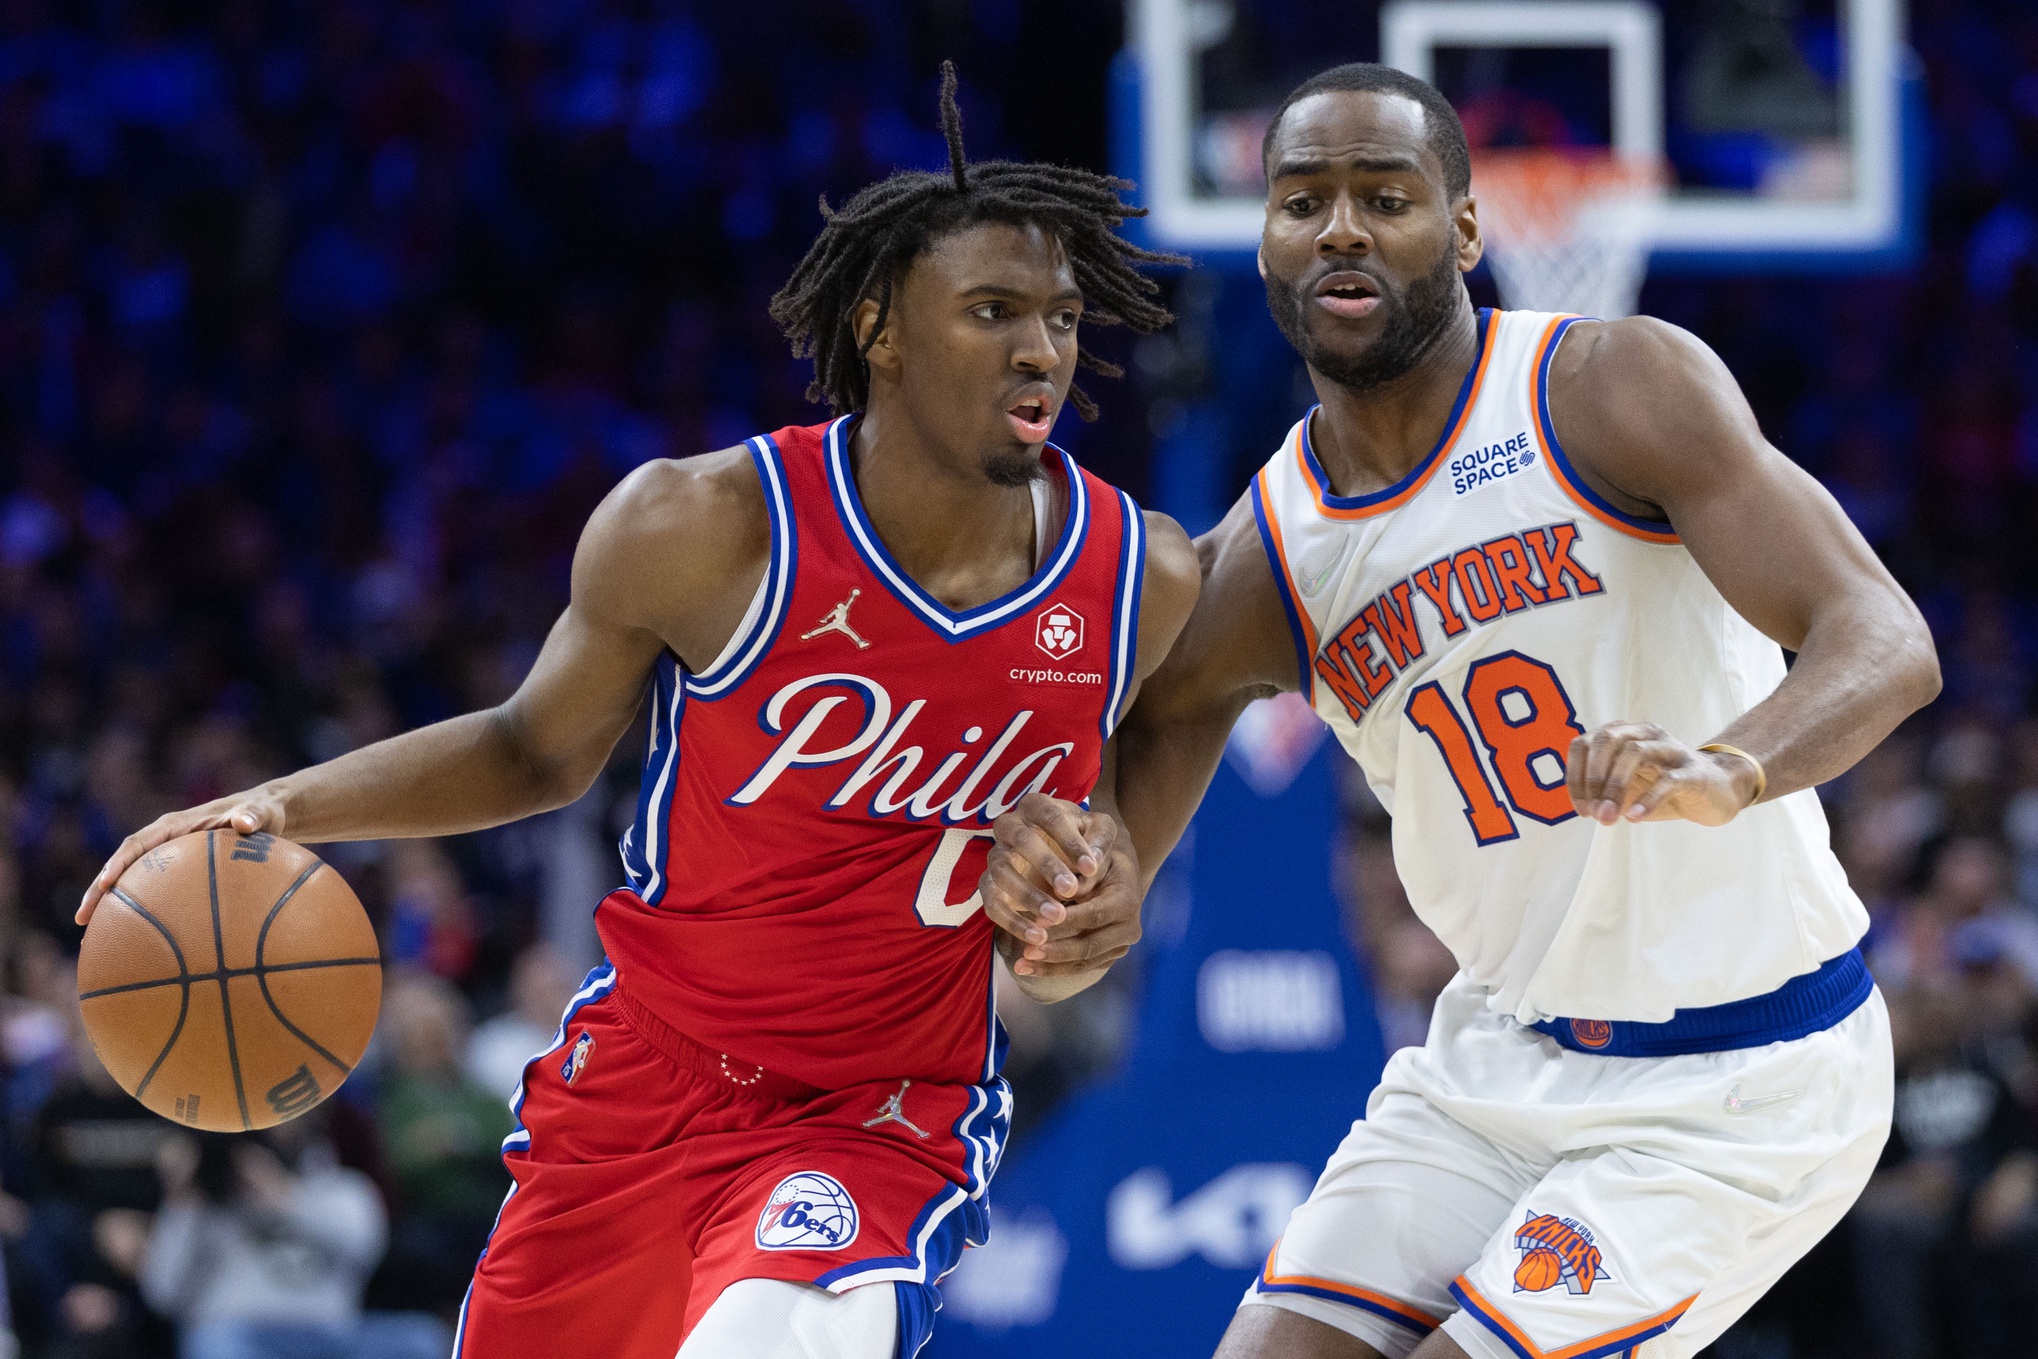 76ers vs. Knicks How to Watch, Live Stream & Odds Friday Sports